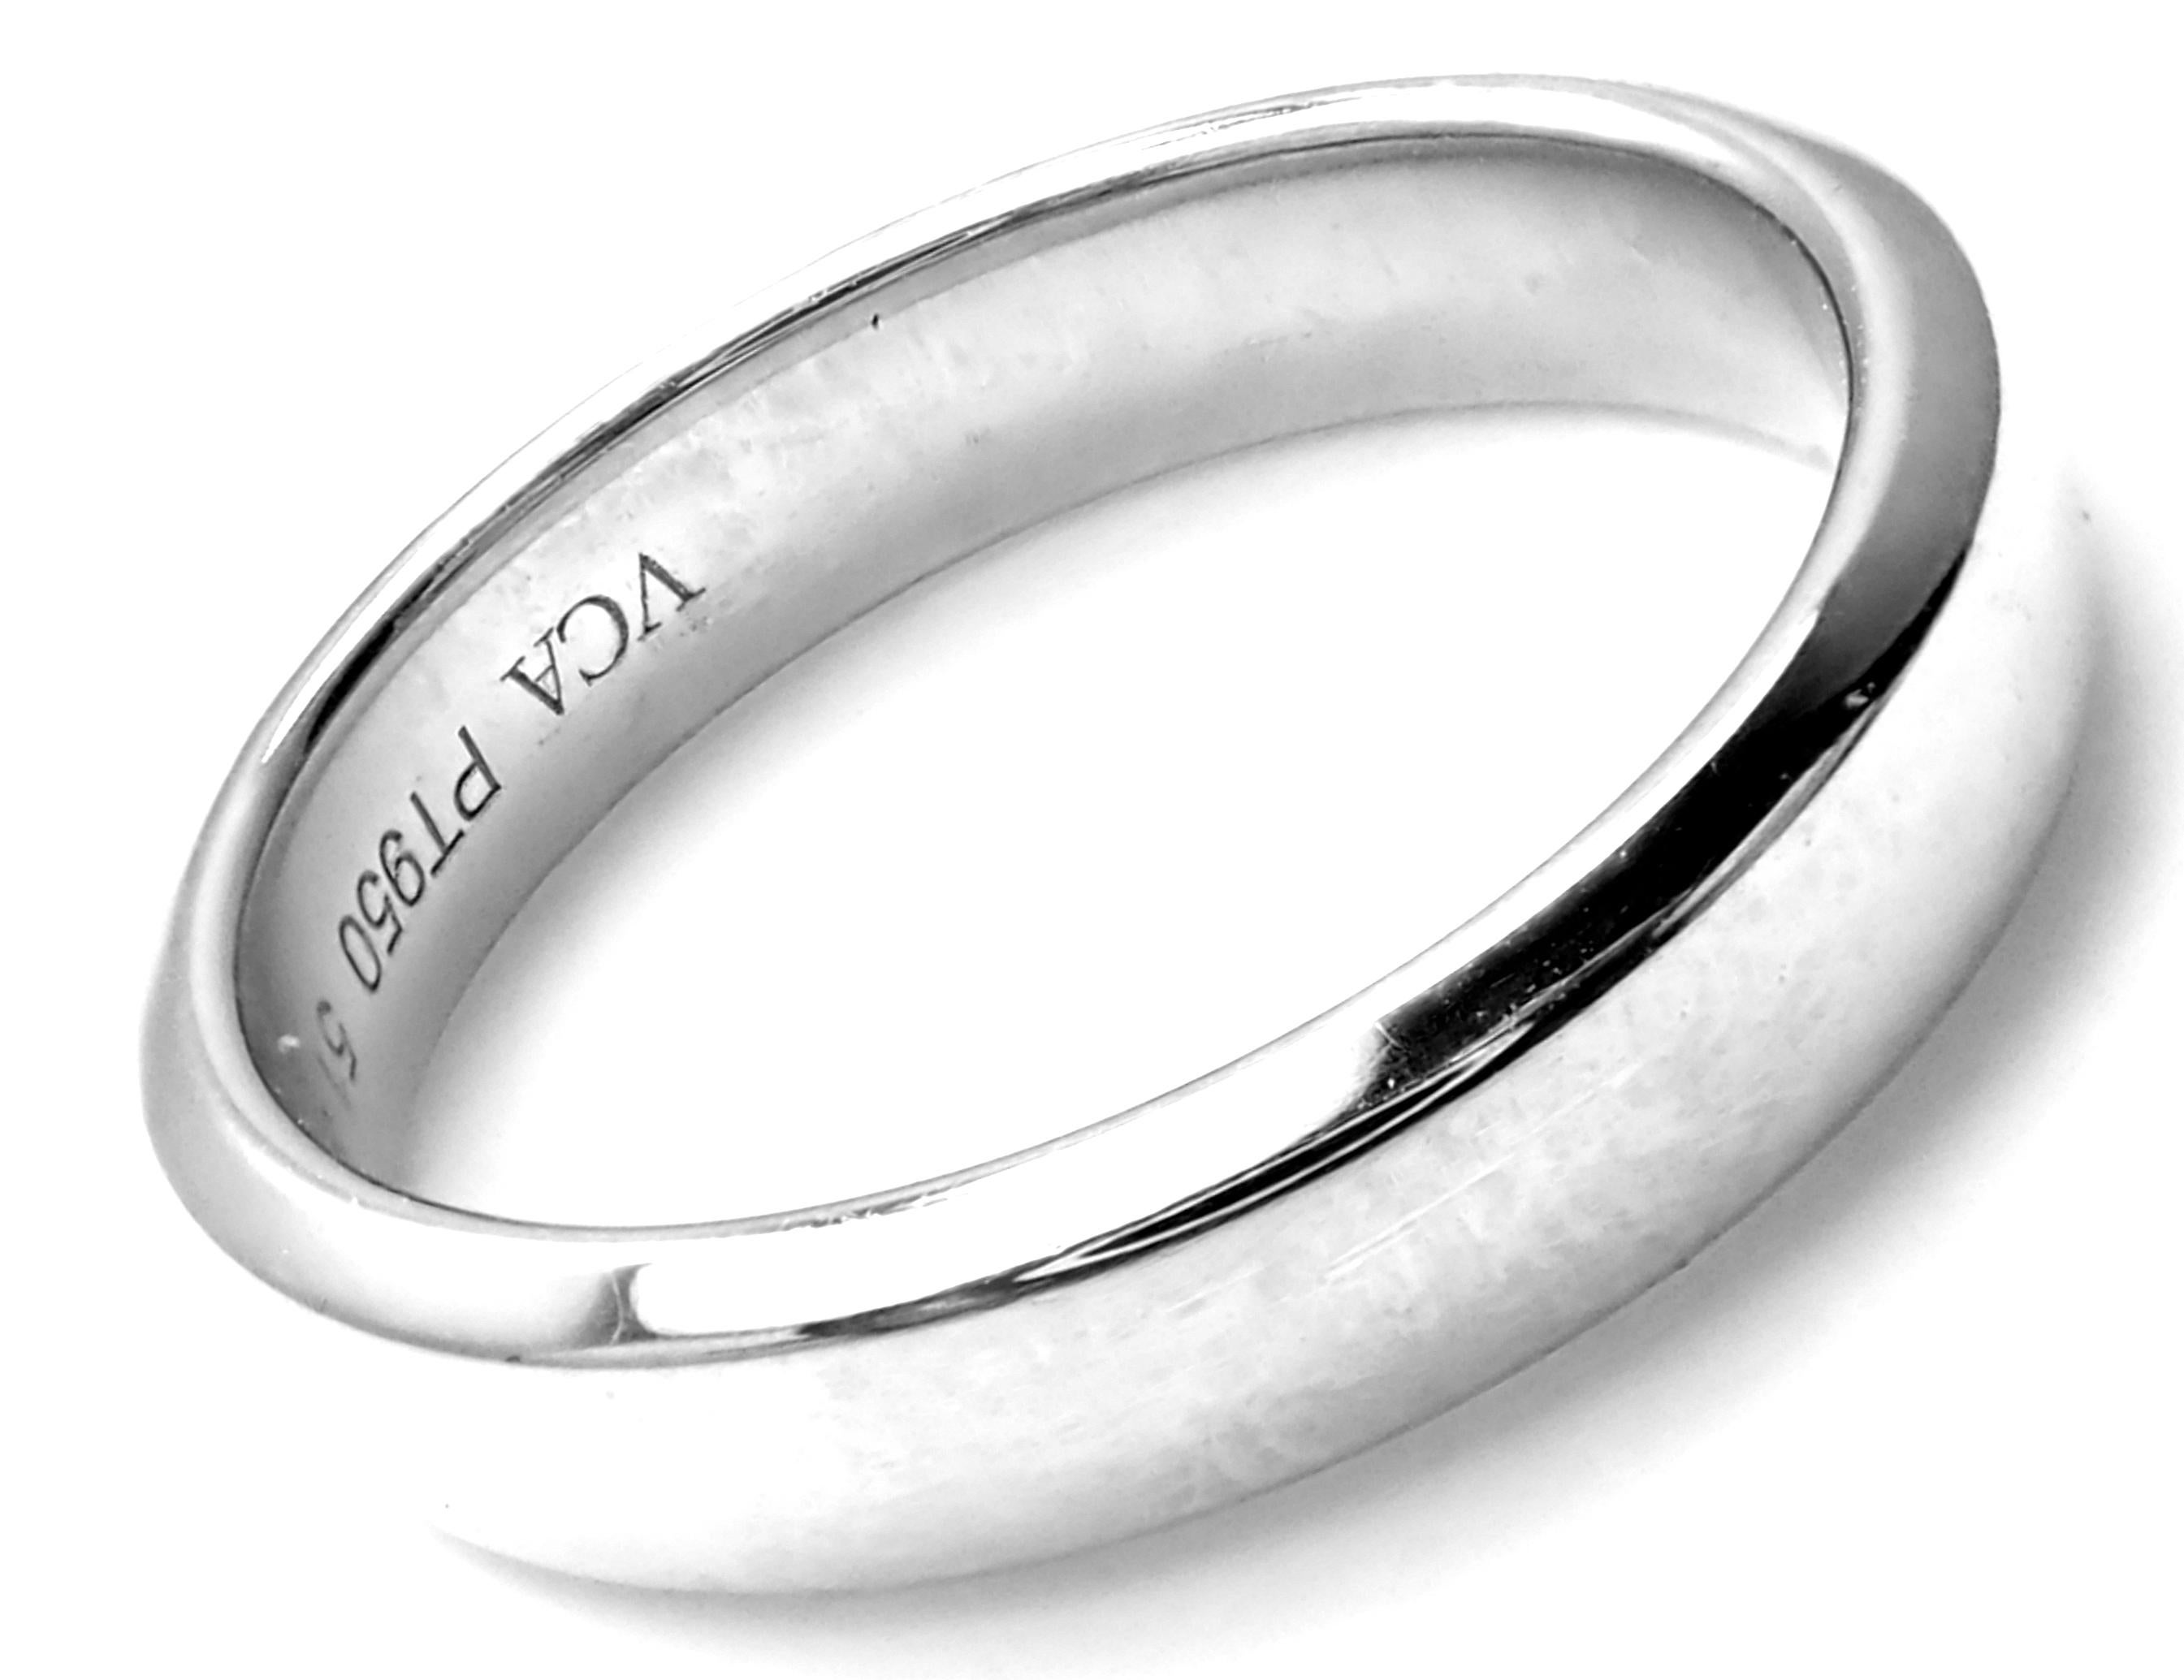 Platinum Toujours 4mm Wide Wedding Band Ring by Van Cleef & Arpels.
Details:
Ring Size: European 51, US 5 3/4
Width:  4mm
Weight:  6.7 grams
Stamped Hallmarks: VCA PT950 51 JB070451
*Free Shipping within the United States*
YOUR PRICE: $2,200
T2073lad